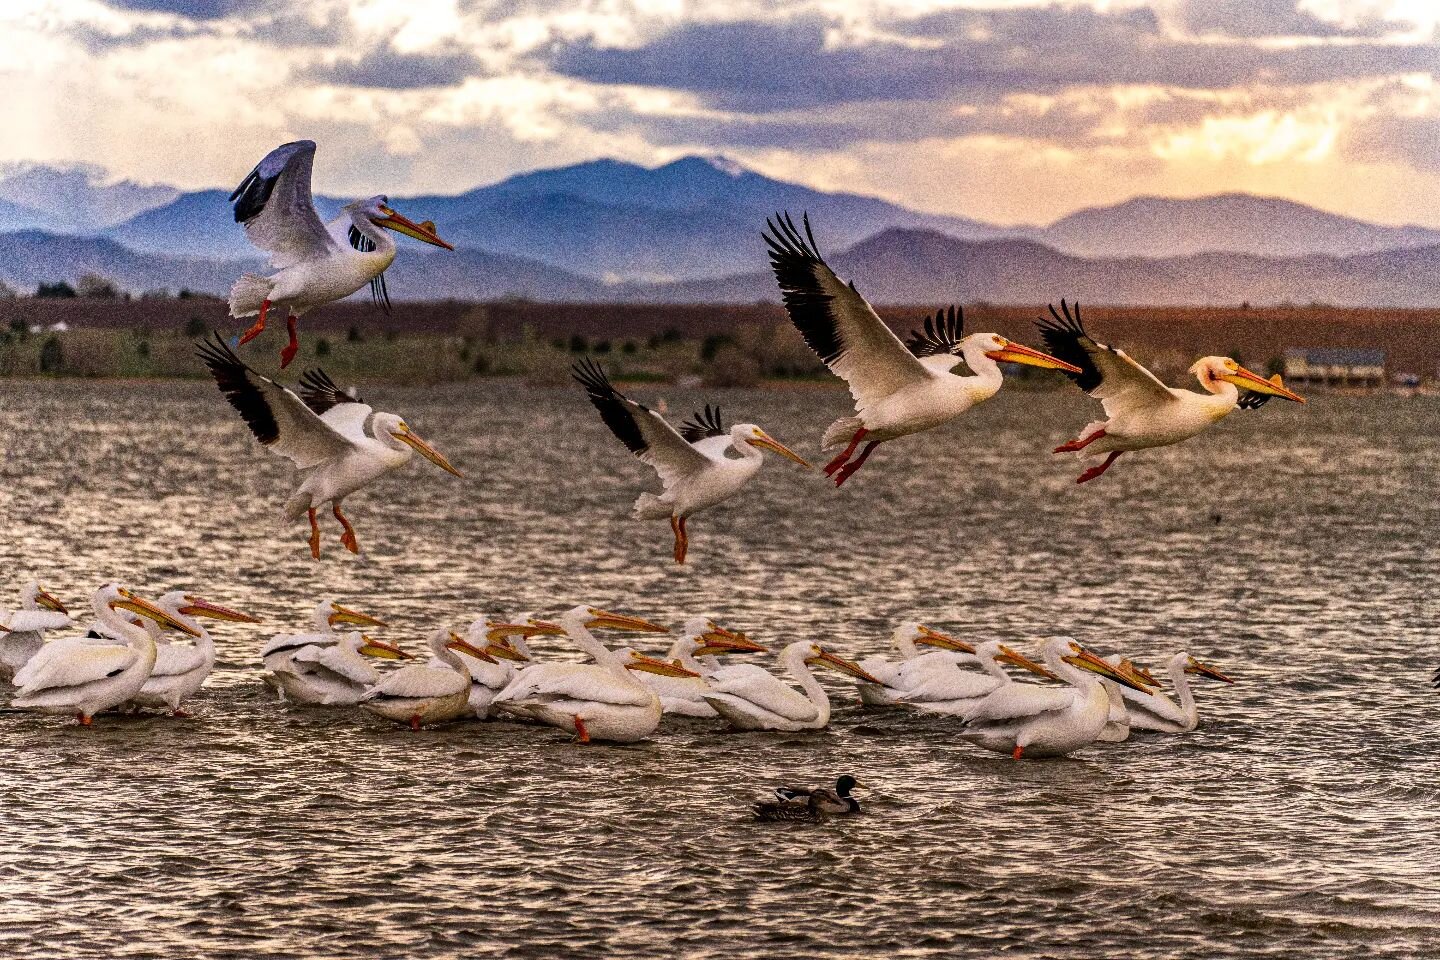 Pelicans in flight

*

*

* 

#rockymountains #leavenotrace #sonyphotography  #withmytamron #visitcolorado #heatonphotography #outtherecolorado #getoutside #getoutdoors #coloradophotographer #coloradophotography #coloradolife #coloradoliving #colorad